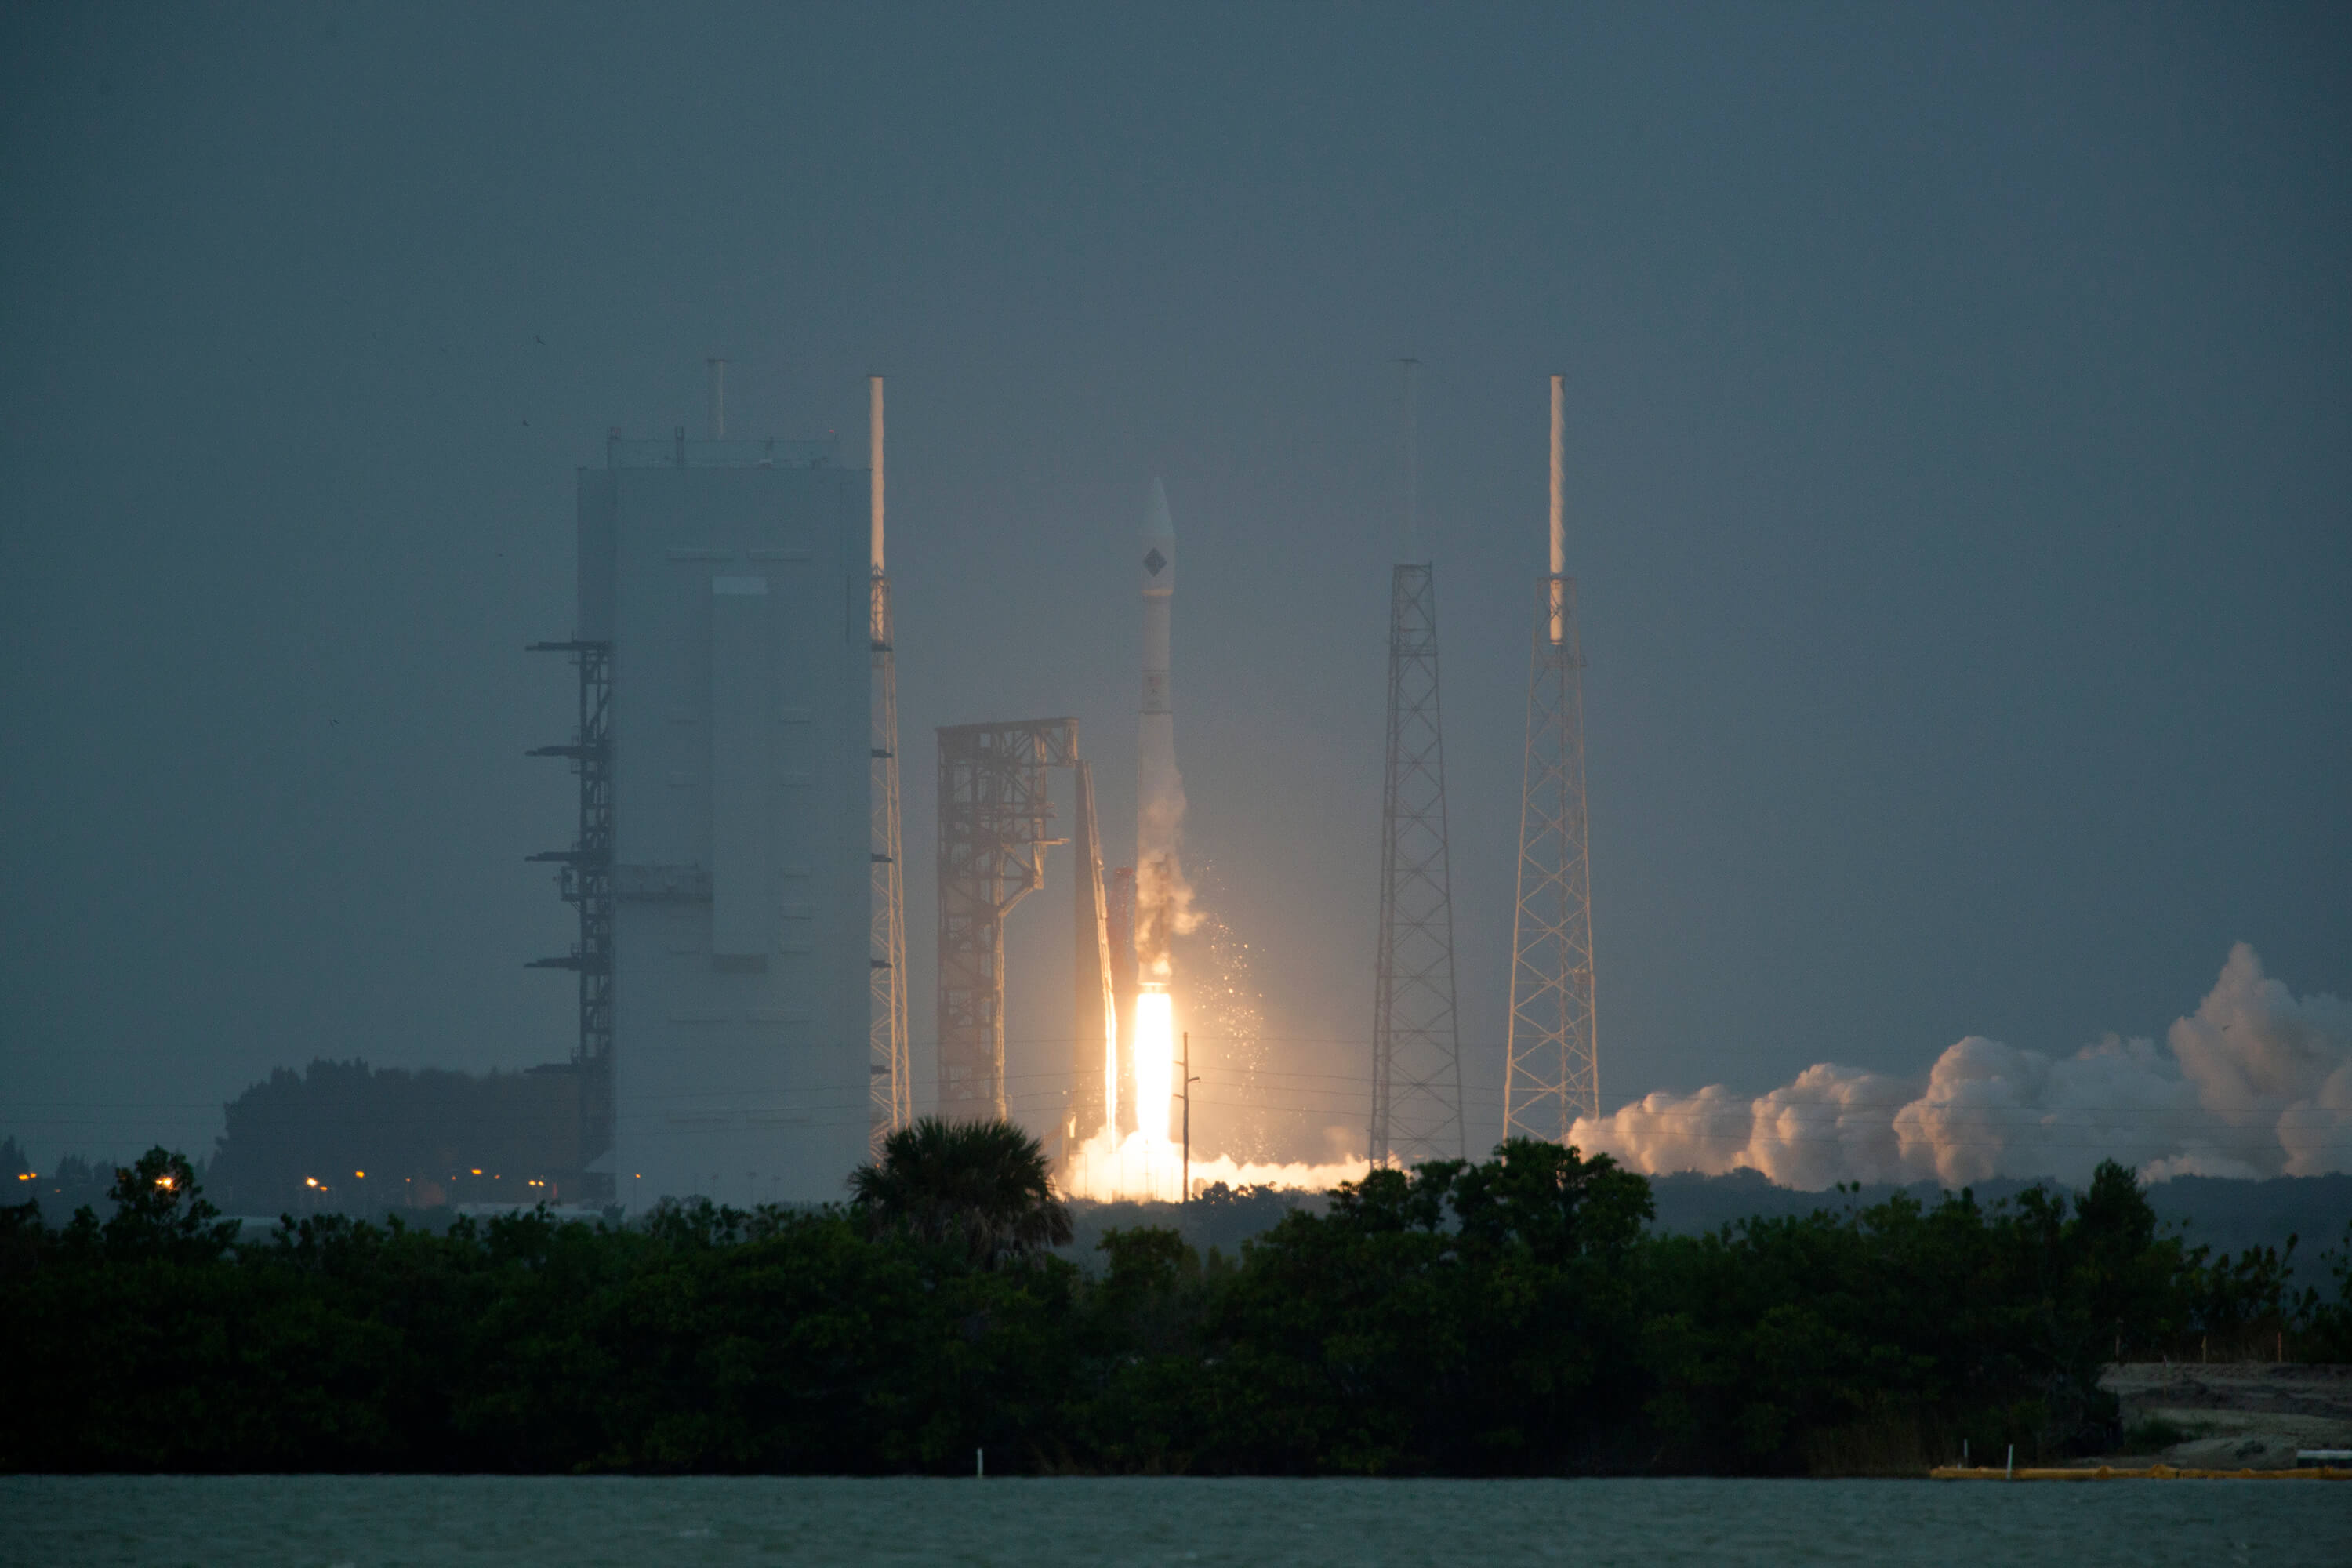 Launch of Orbital's Cygnus supply spacecraft aboard a ULA Delta V rocket from Cape Canaveral, 6/12/15. Photo: NASA